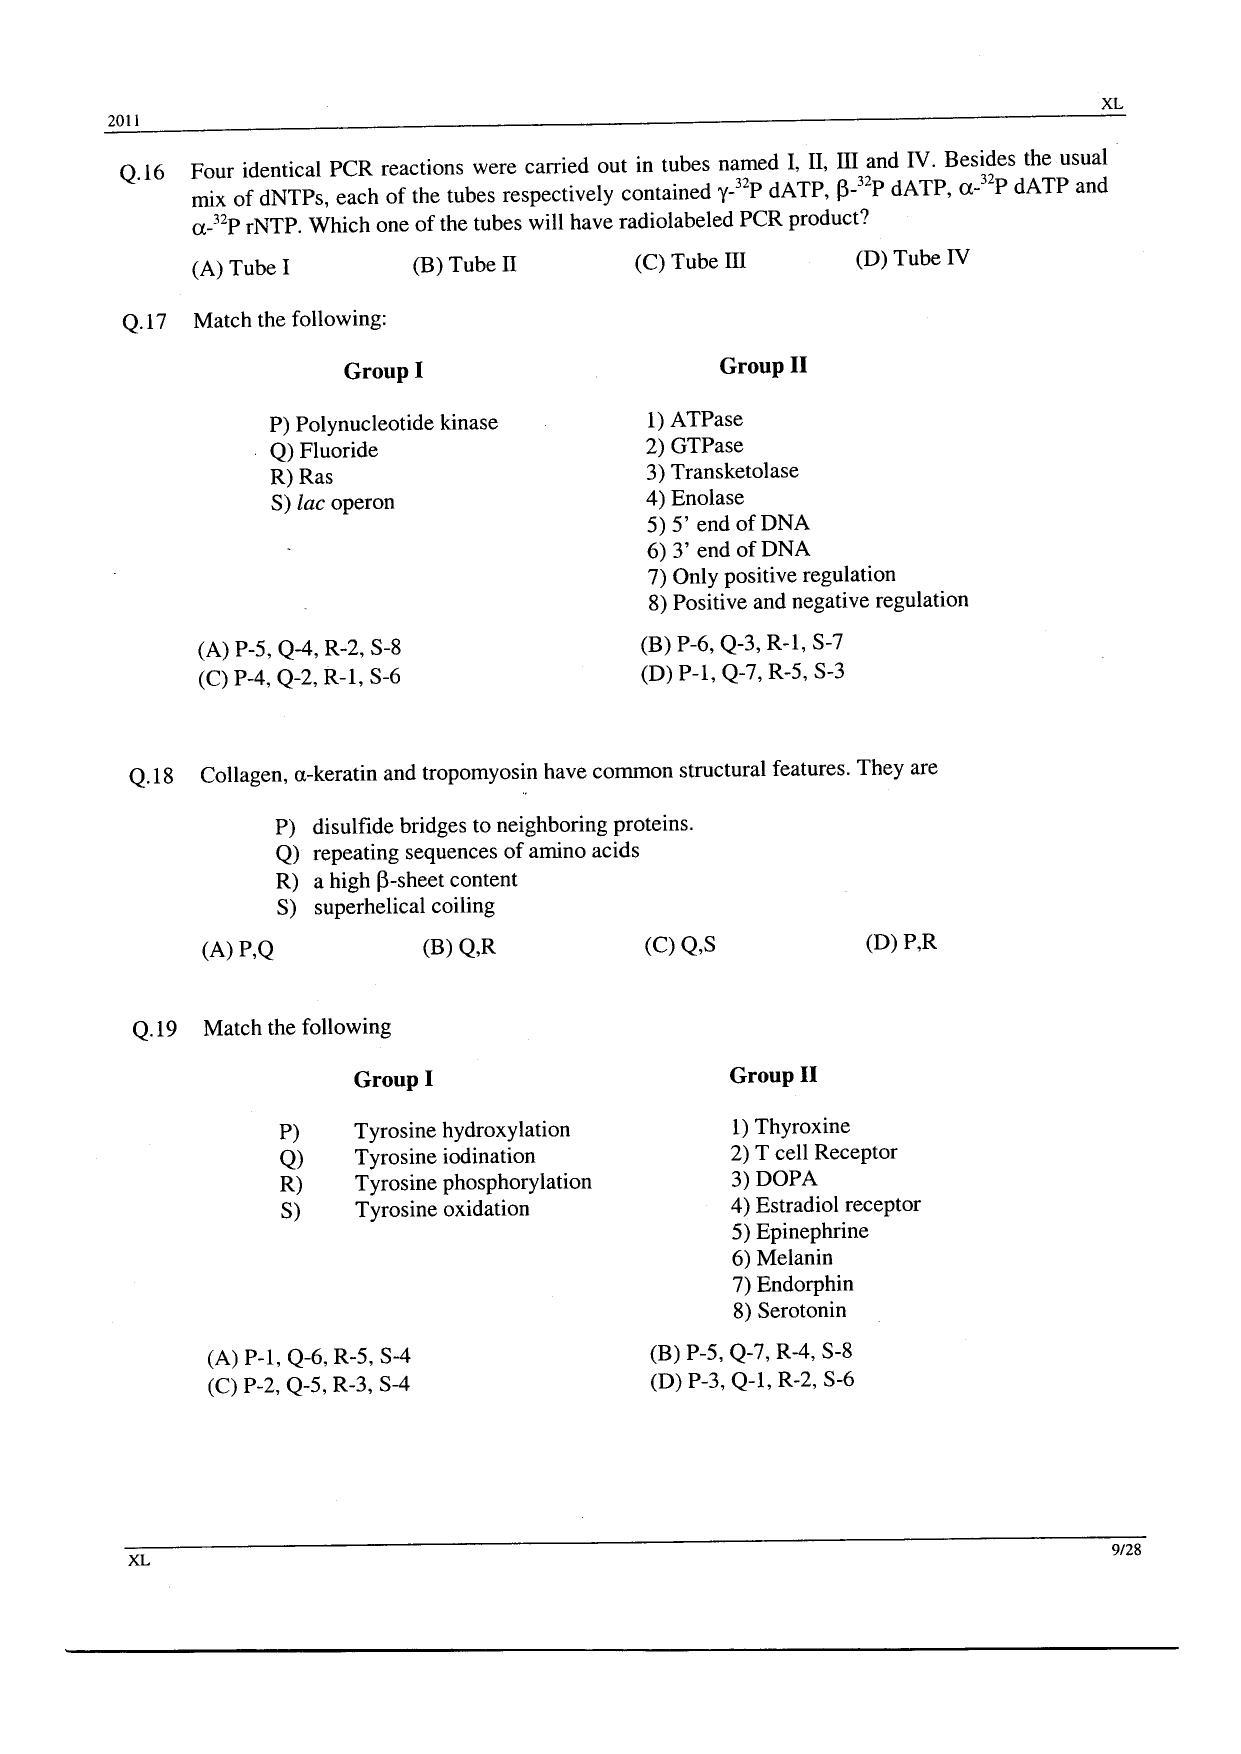 GATE 2011 Life Sciences (XL) Question Paper with Answer Key - Page 9